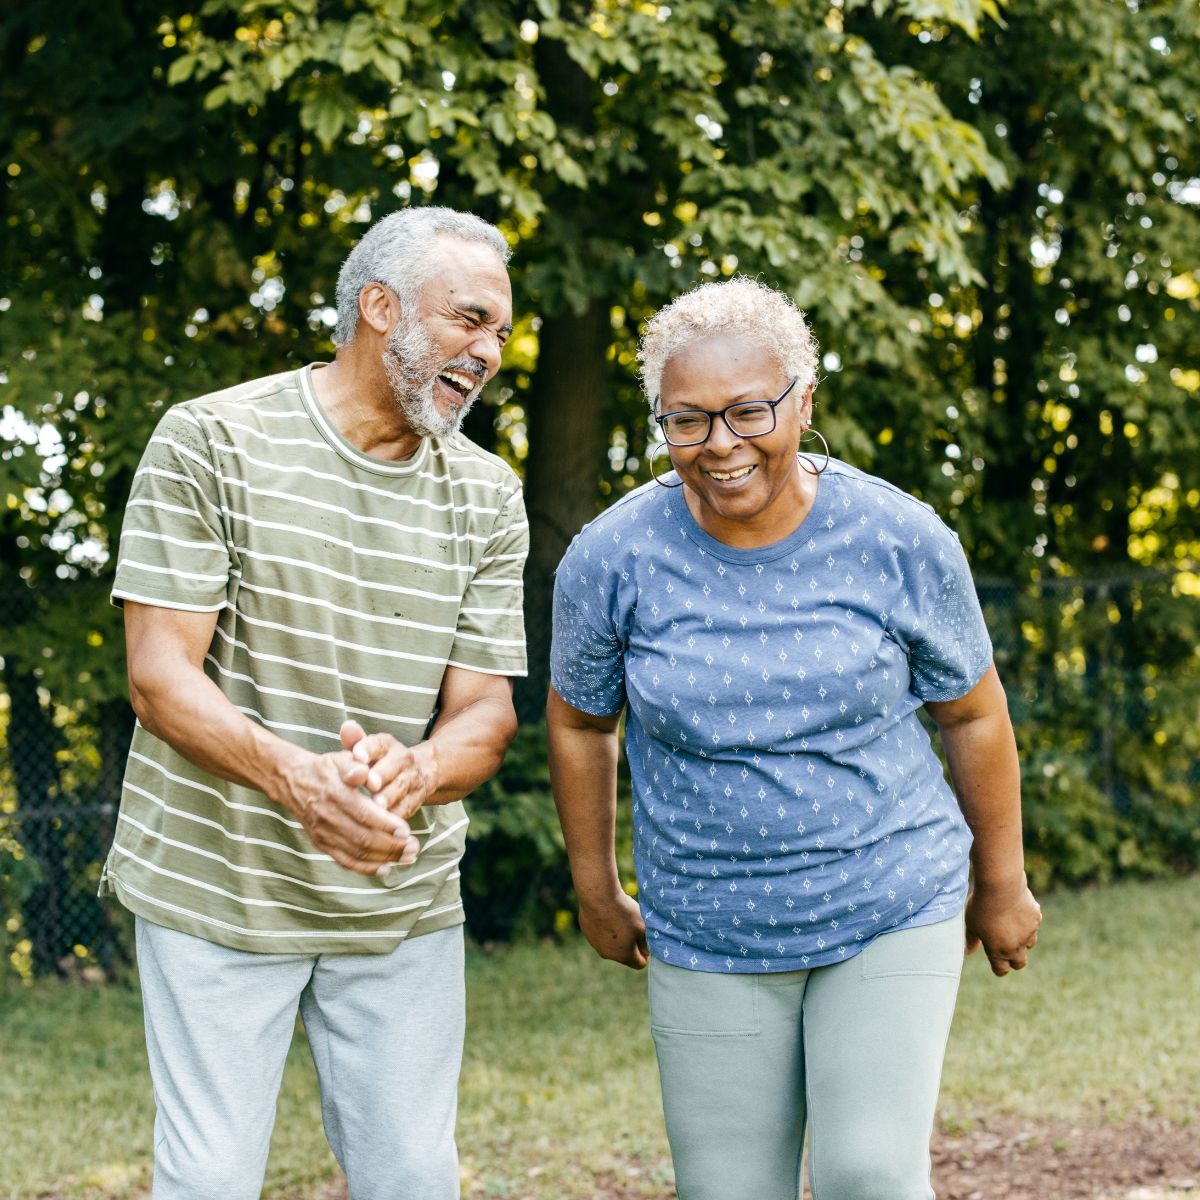 Elderly couple taking a walk in a park on a summer's day, chatting and smiling